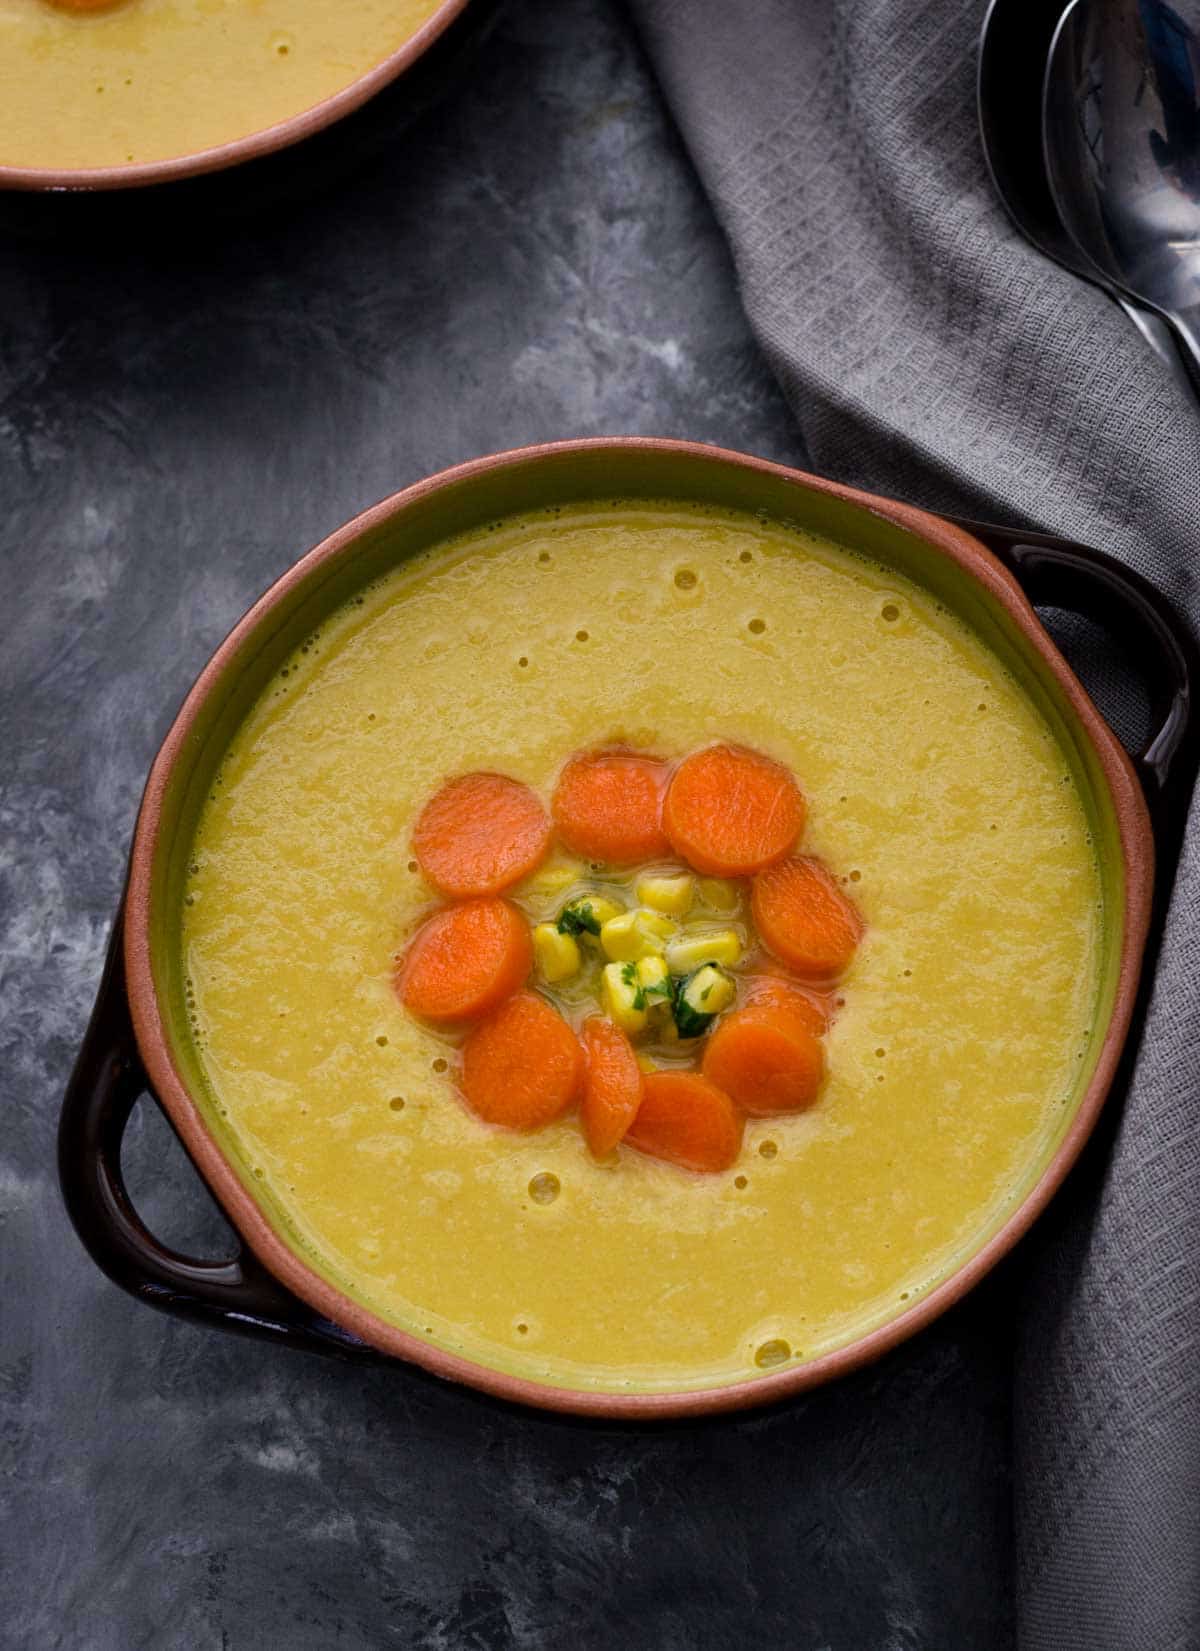 Indo chinese corn soup topped with chopped carrots and served in a green and black bowl